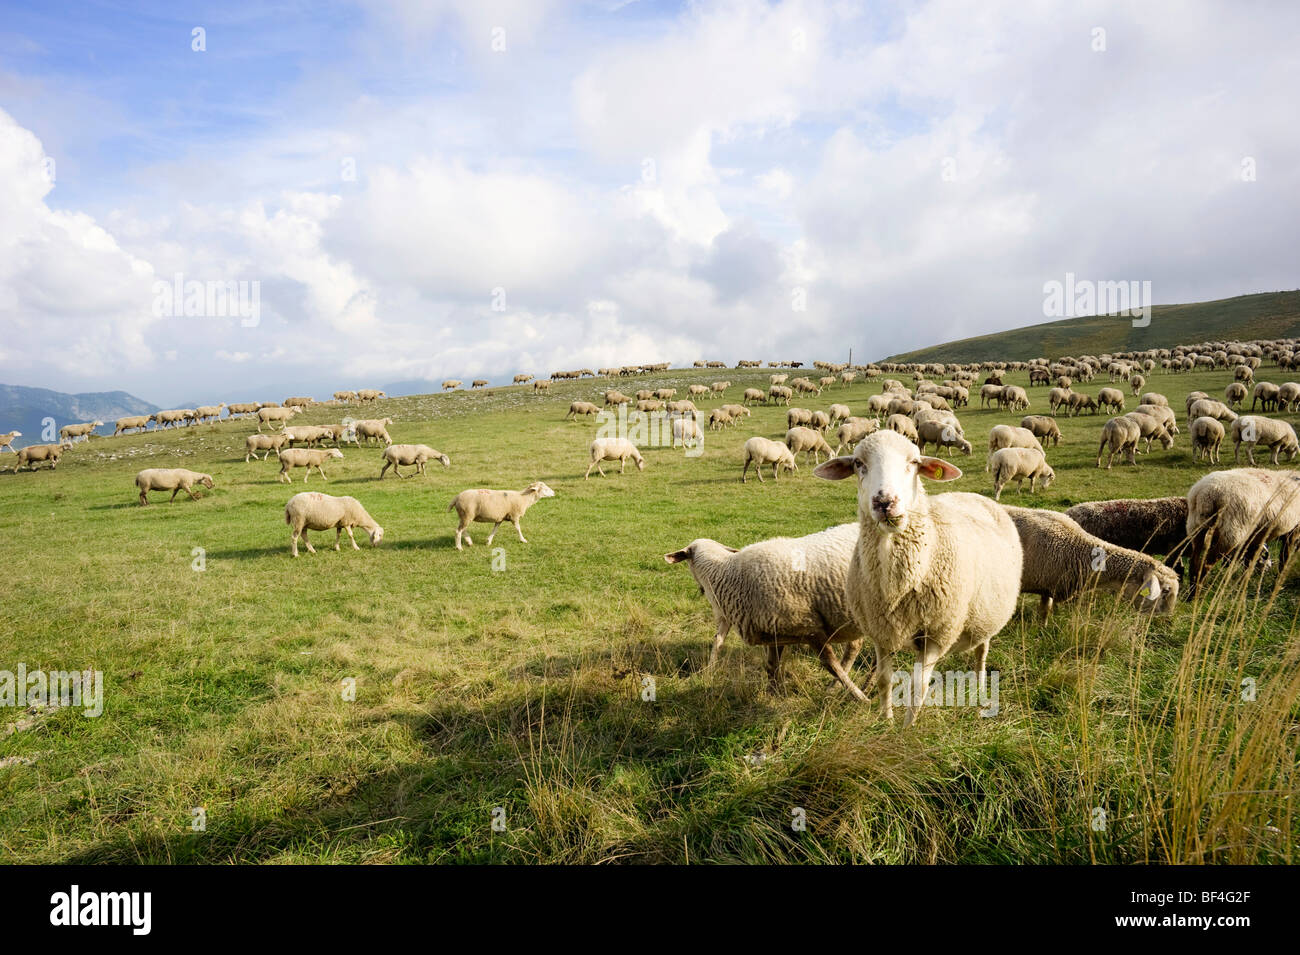 Flock of sheep in the late afternoon in the Monte Sibillini mountains, Apennines, Le Marche, Italy, Europe Stock Photo